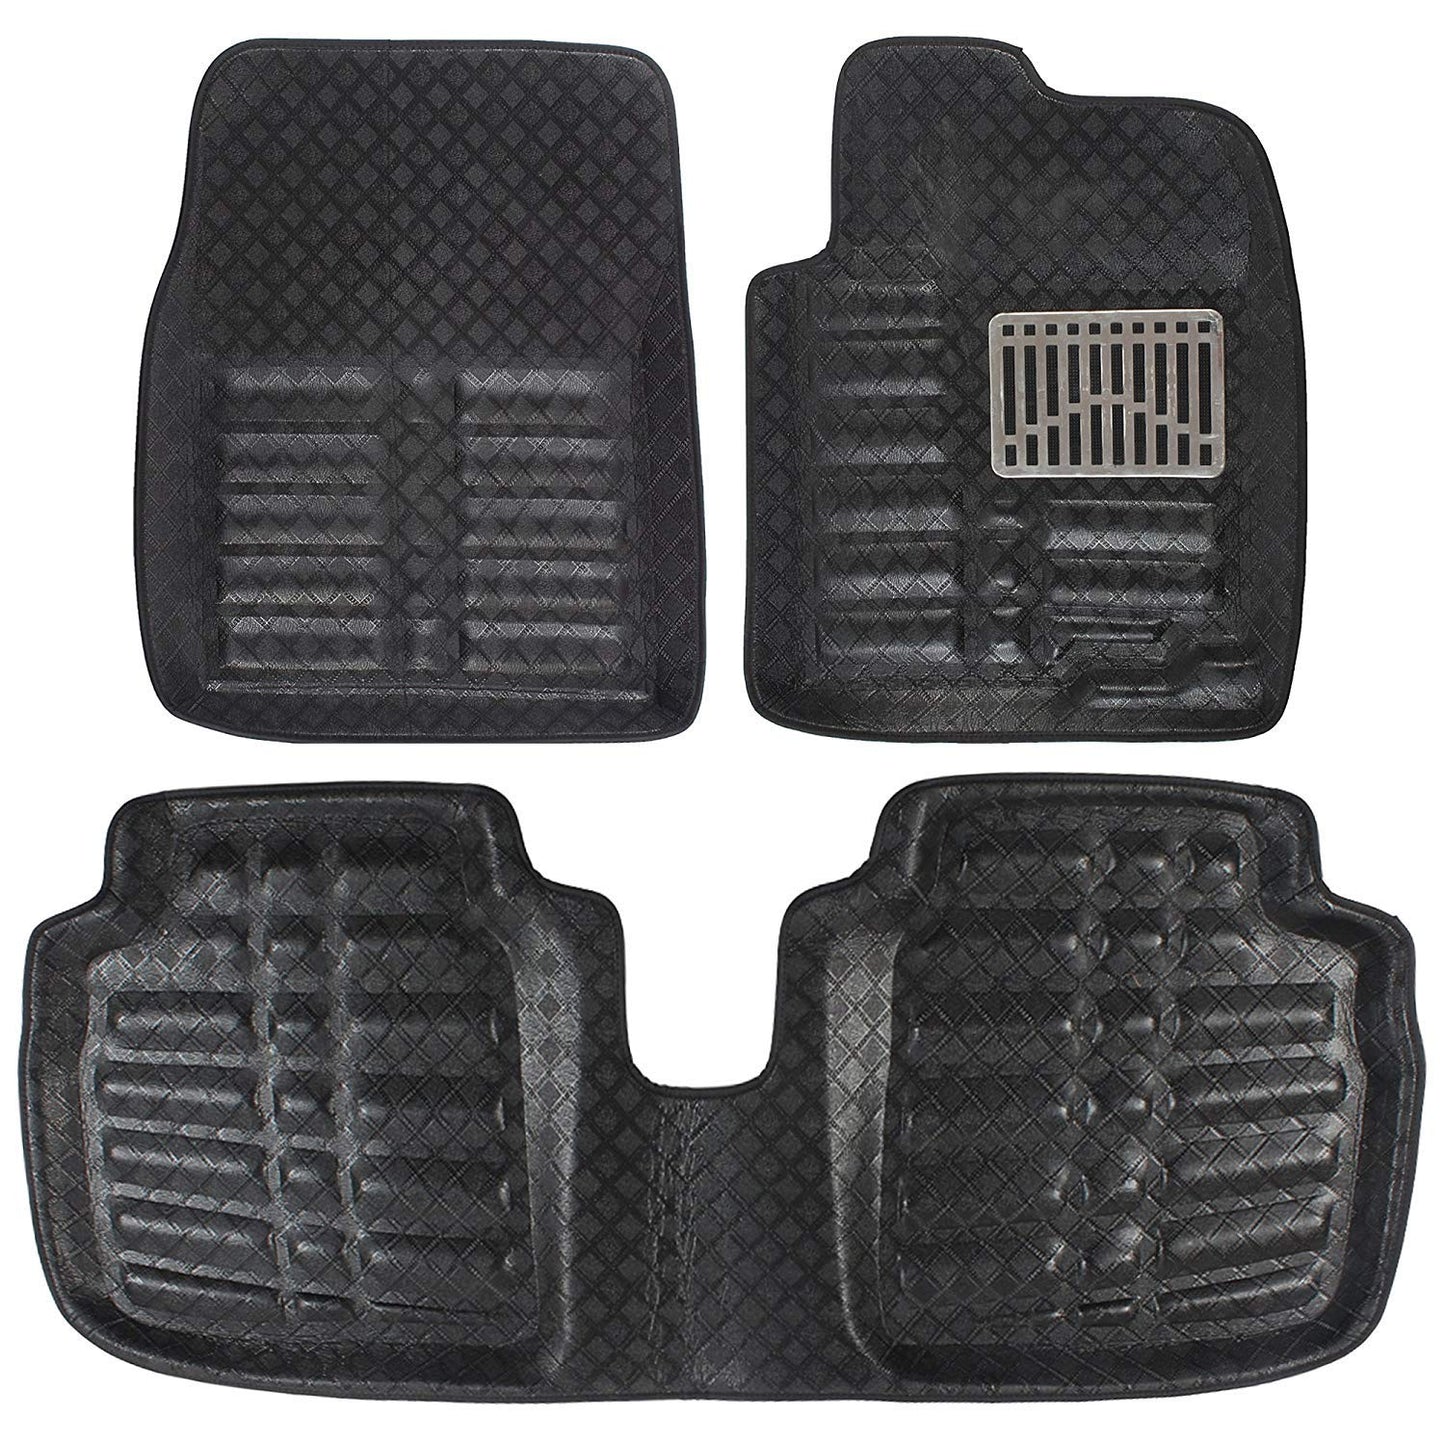 Oshotto 4D Artificial Leather Car Floor Mats For Maruti Suzuki Ignis - Set of 3 (2 Pieces Front & one Long Single Rear PC) - Black